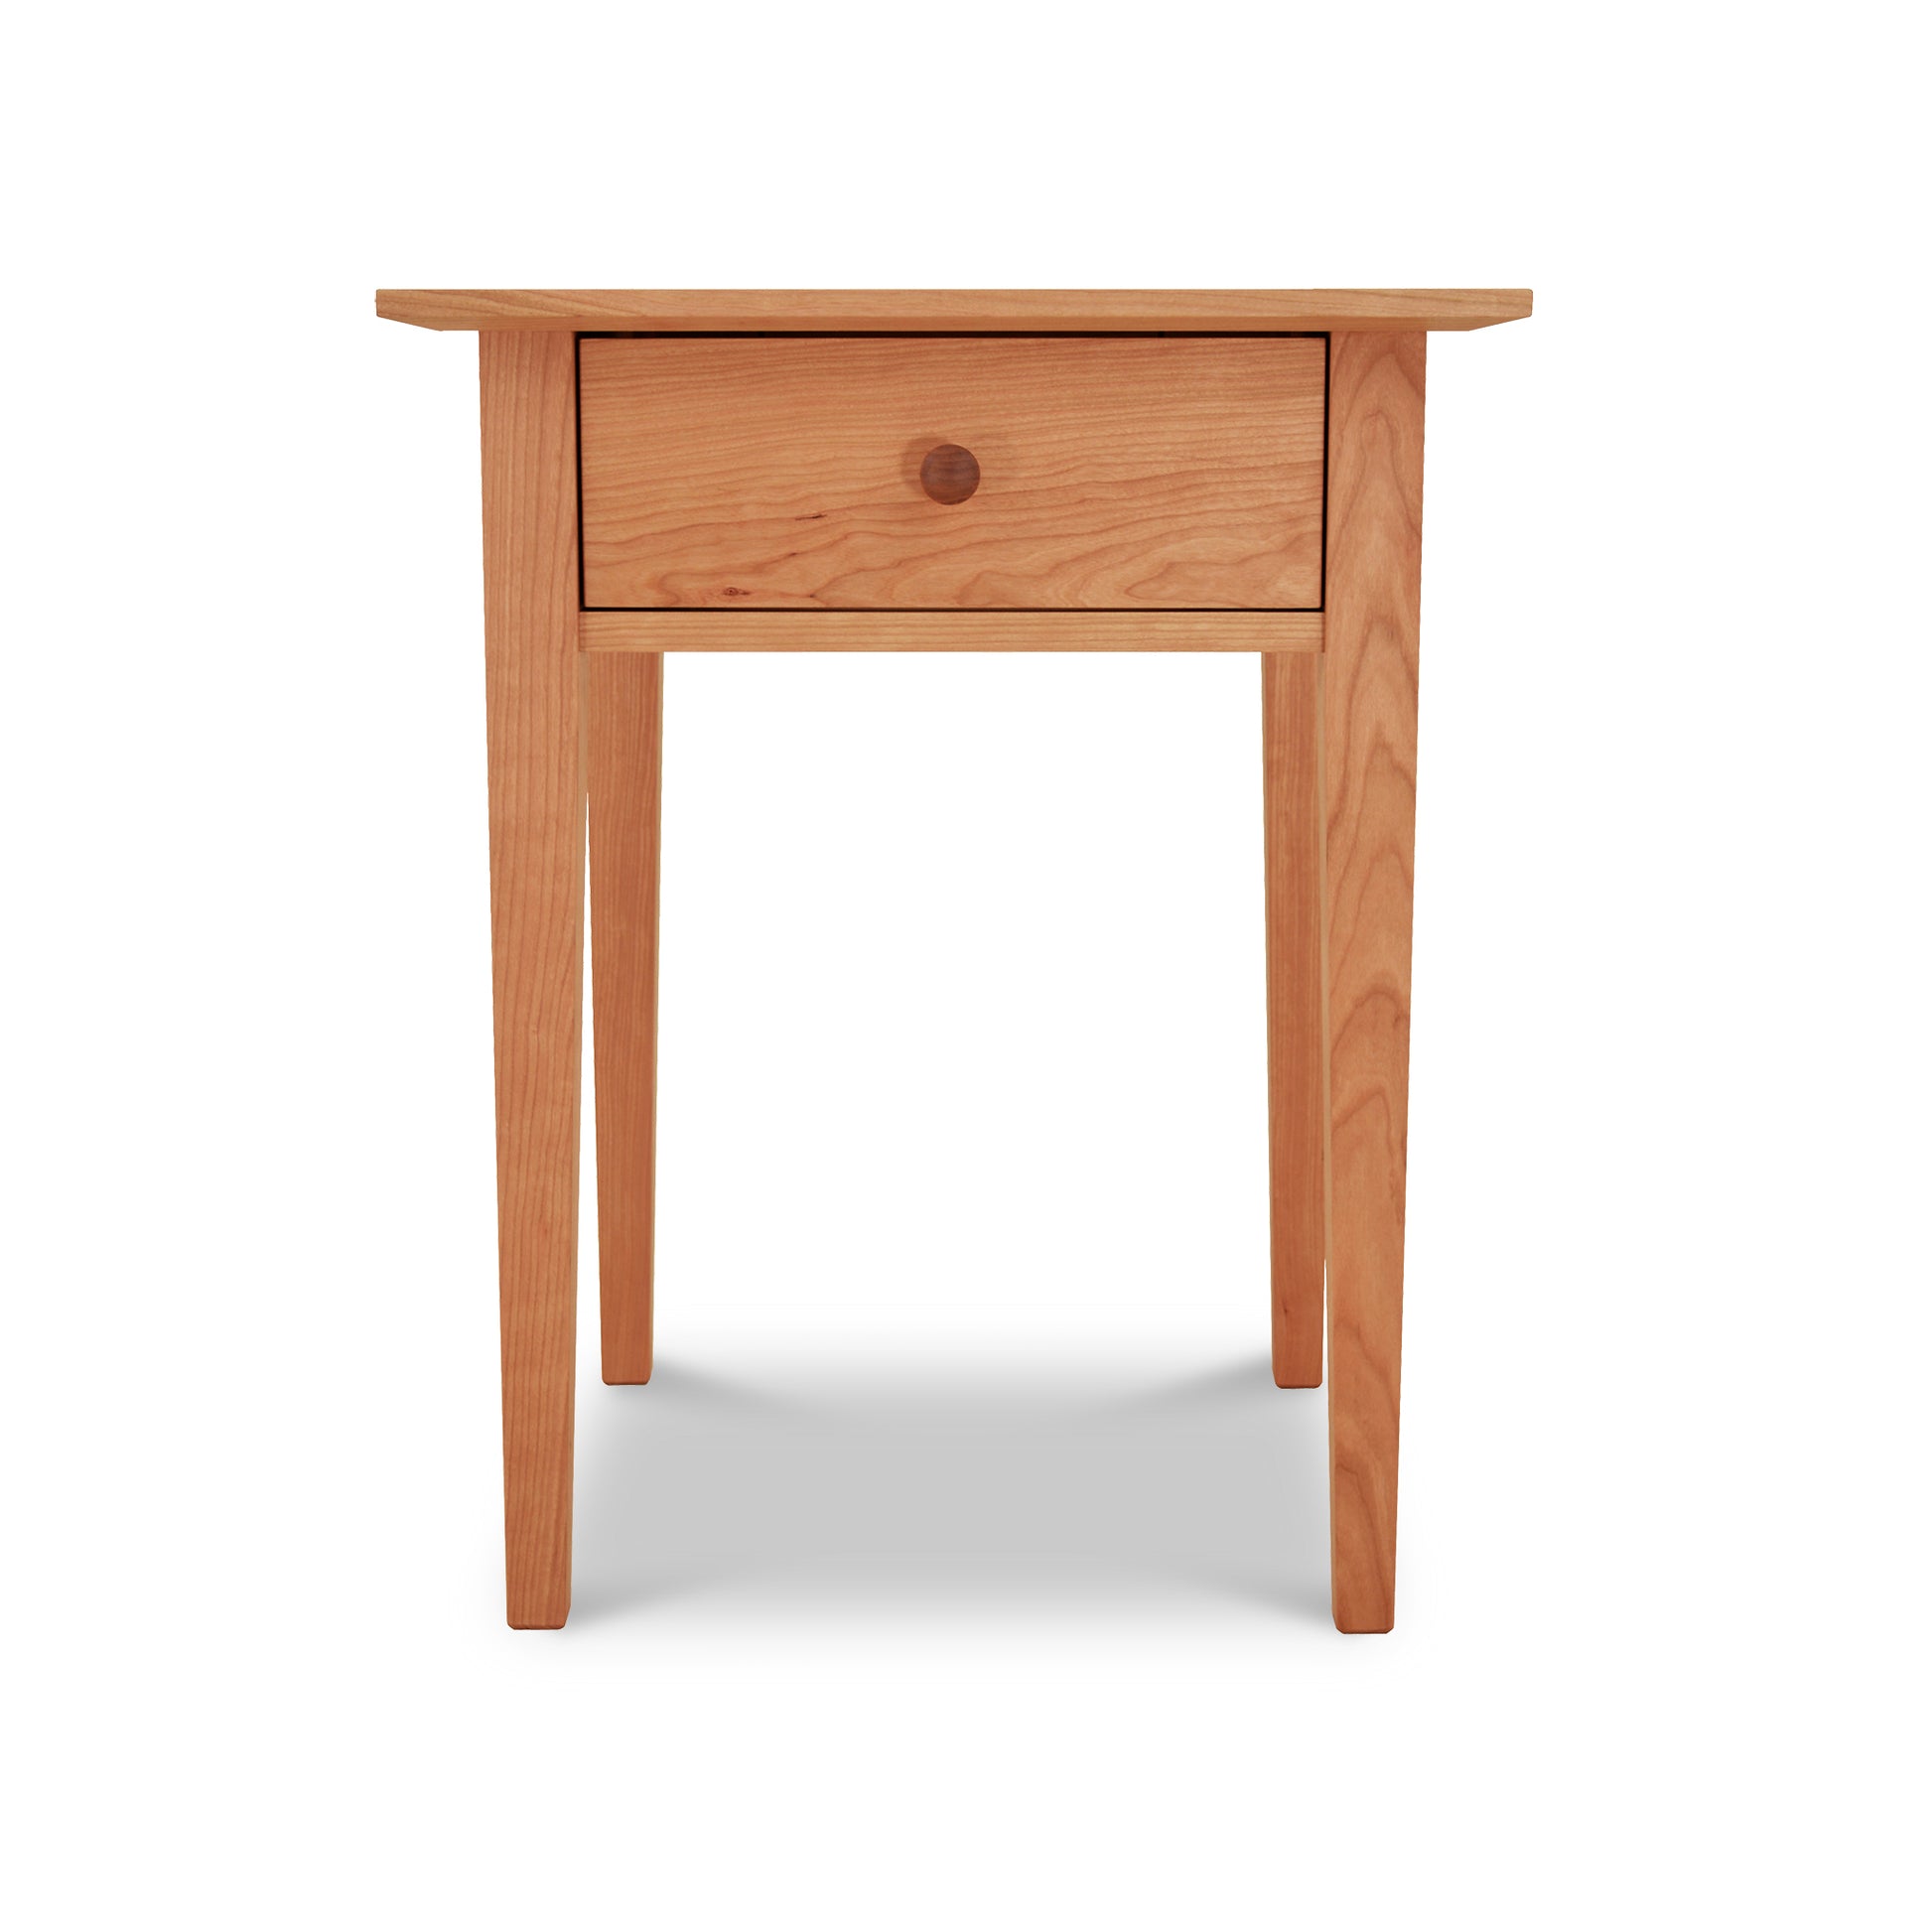 An American Shaker 1-Drawer Nightstand from Maple Corner Woodworks, featuring a round knob. The table stands on four straight legs and has a smooth top, photographed against a plain white background. Crafted from solid hardwoods.